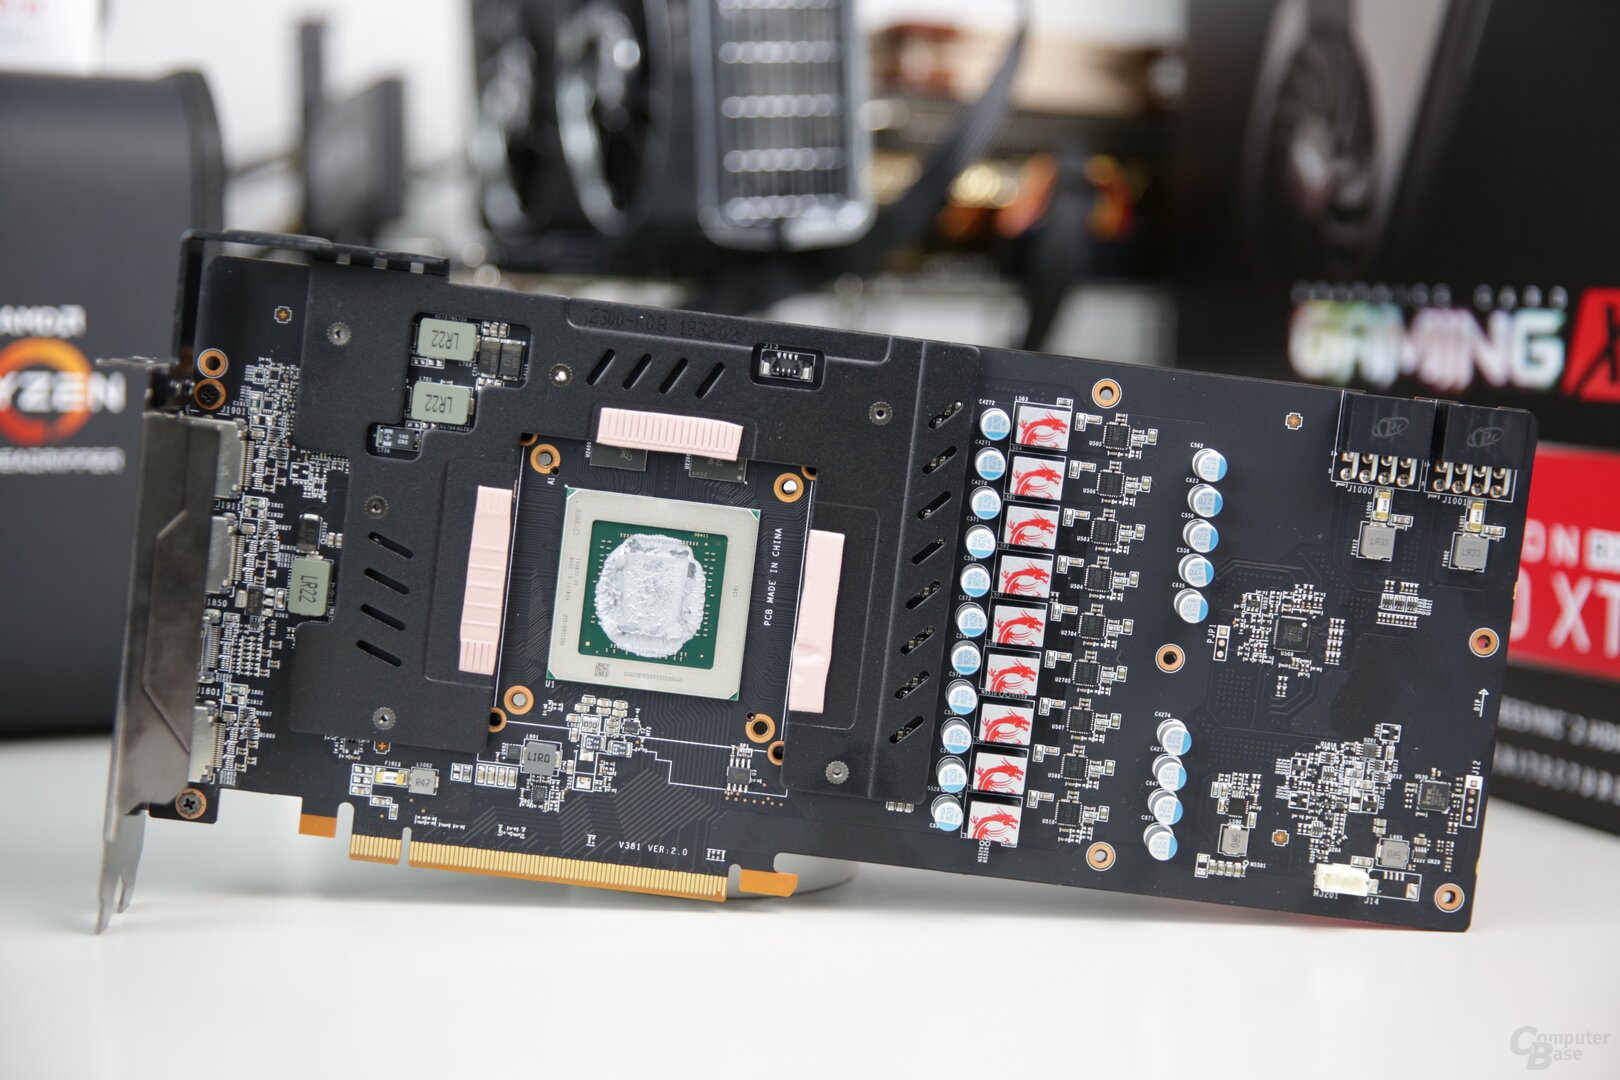 The PCB of the MSI Radeon RX 5700 XT Gaming X